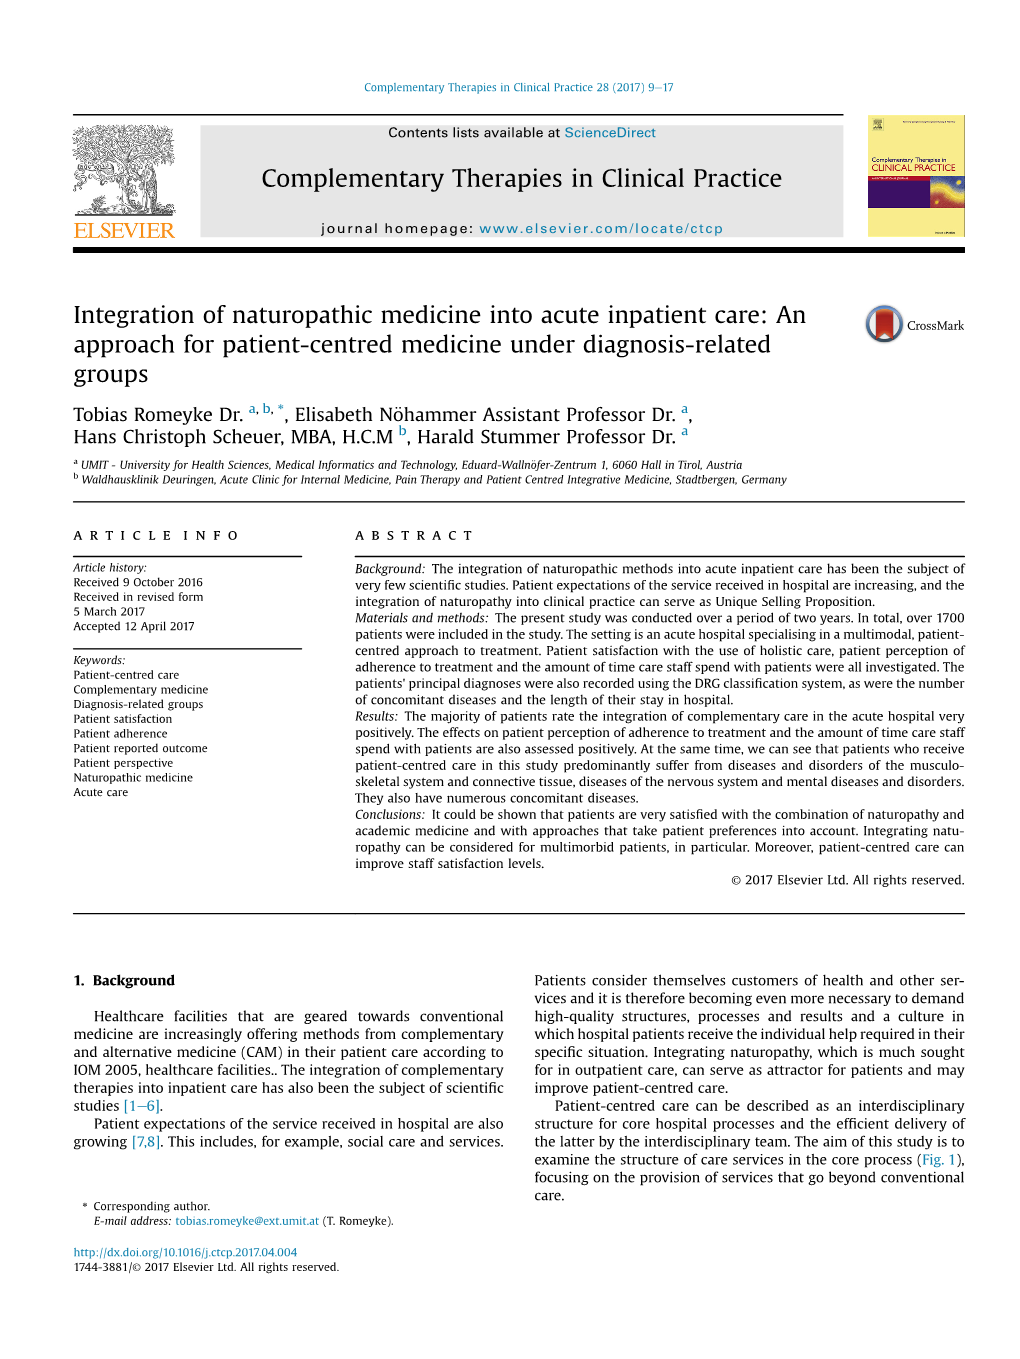 Integration of Naturopathic Medicine Into Acute Inpatient Care: an Approach for Patient-Centred Medicine Under Diagnosis-Related Groups